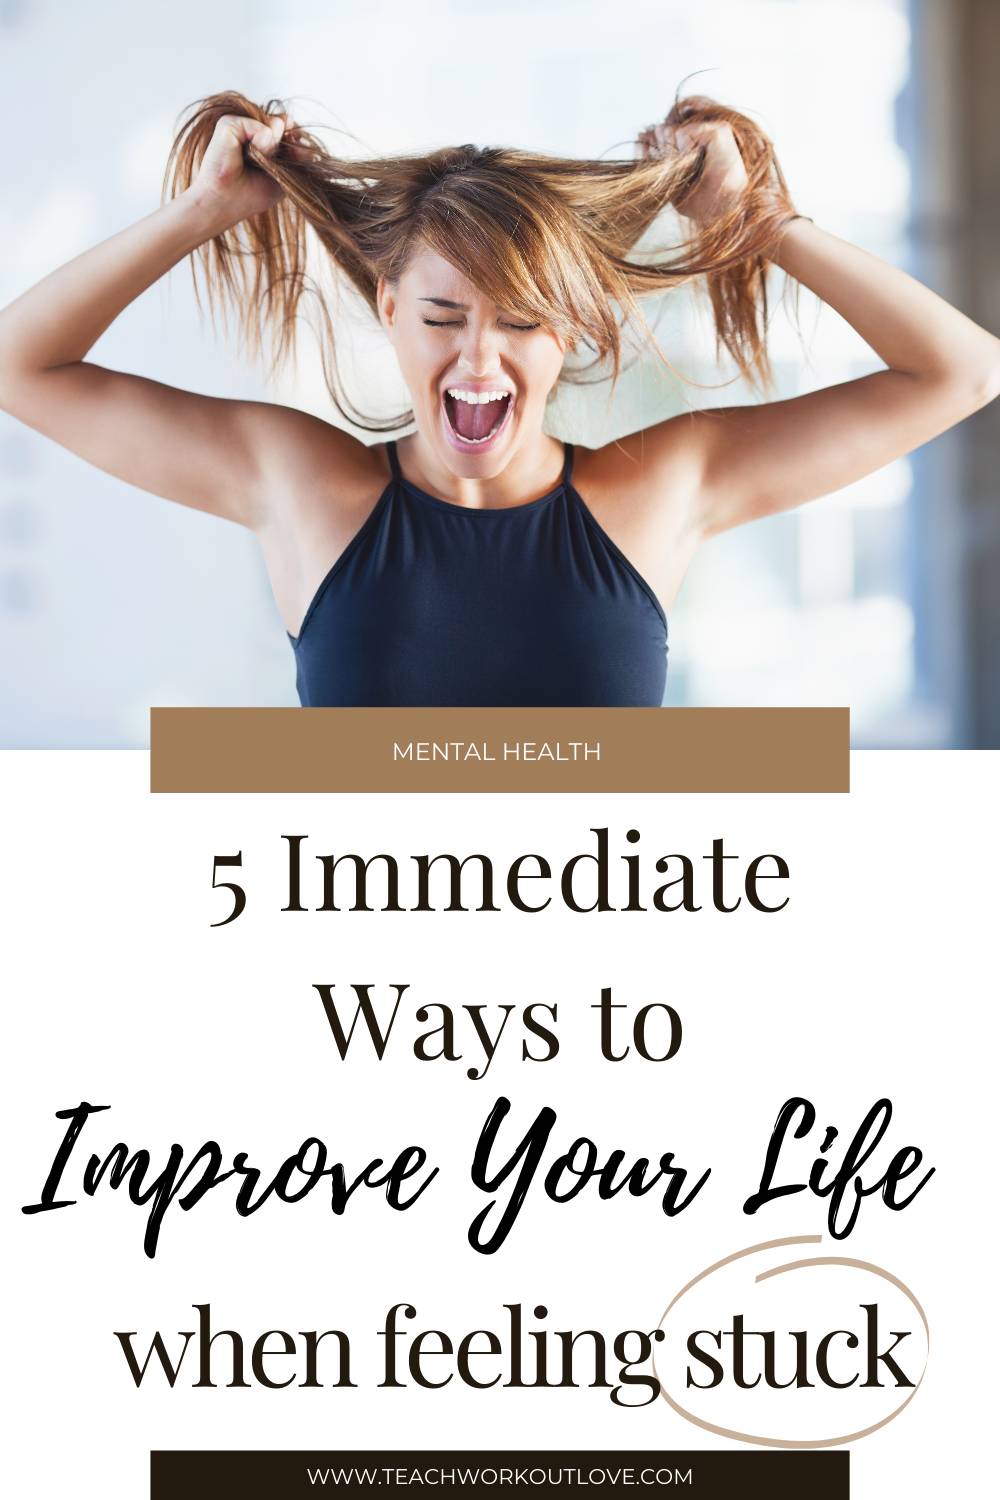 You don't have to do a significant overhaul of your life, but simple everyday decisions and actions can go a long way in ensuring you improve your life.